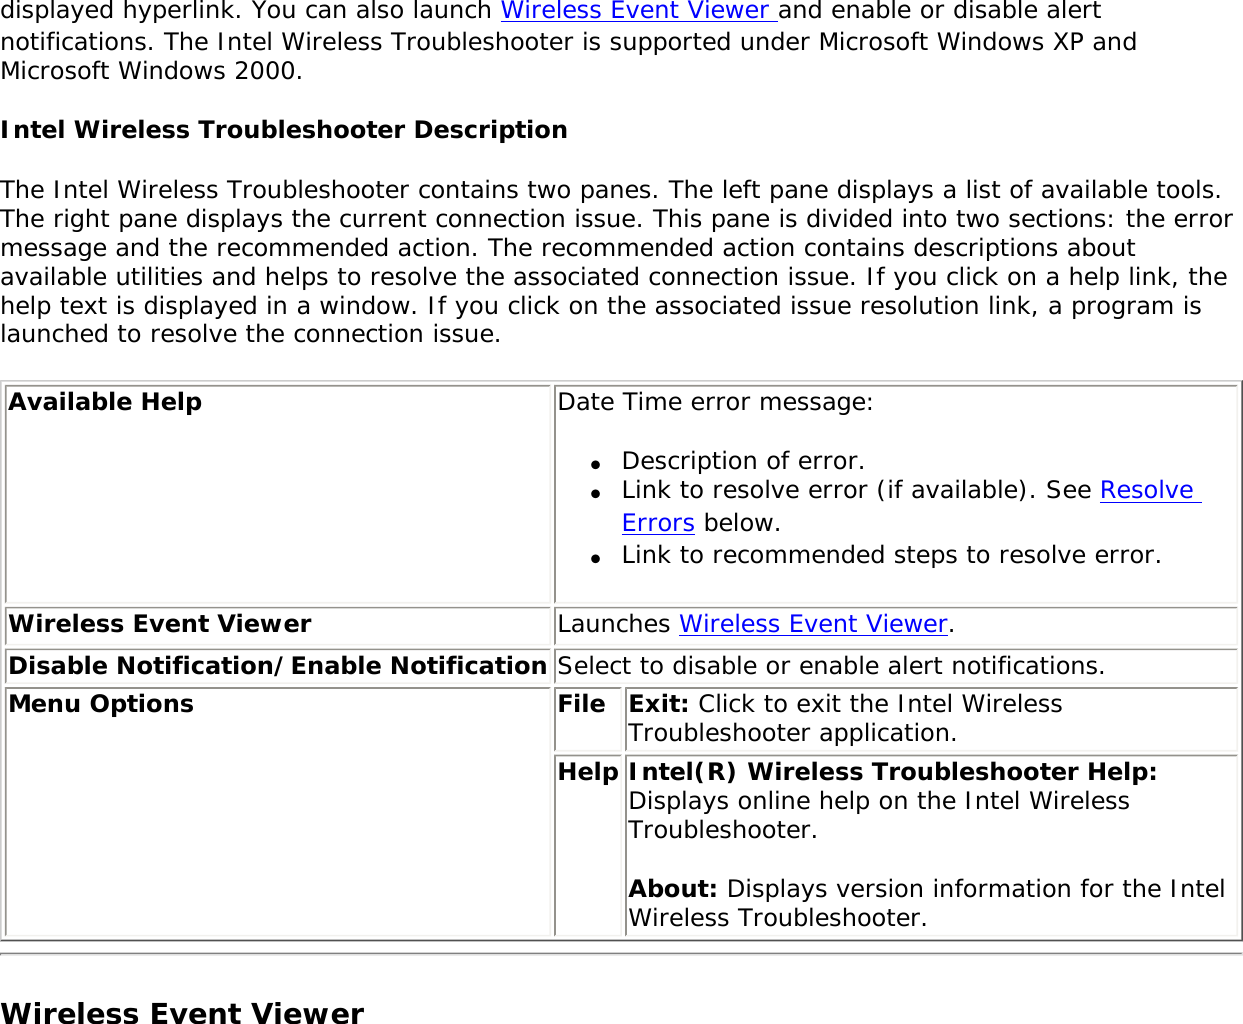 displayed hyperlink. You can also launch Wireless Event Viewer and enable or disable alert notifications. The Intel Wireless Troubleshooter is supported under Microsoft Windows XP and Microsoft Windows 2000. Intel Wireless Troubleshooter DescriptionThe Intel Wireless Troubleshooter contains two panes. The left pane displays a list of available tools. The right pane displays the current connection issue. This pane is divided into two sections: the error message and the recommended action. The recommended action contains descriptions about available utilities and helps to resolve the associated connection issue. If you click on a help link, the help text is displayed in a window. If you click on the associated issue resolution link, a program is launched to resolve the connection issue.Available Help Date Time error message: ●     Description of error.●     Link to resolve error (if available). See Resolve Errors below.●     Link to recommended steps to resolve error.Wireless Event Viewer Launches Wireless Event Viewer.Disable Notification/Enable Notification Select to disable or enable alert notifications.   Menu Options  File Exit: Click to exit the Intel Wireless Troubleshooter application.Help  Intel(R) Wireless Troubleshooter Help: Displays online help on the Intel Wireless Troubleshooter.About: Displays version information for the Intel Wireless Troubleshooter.  Wireless Event Viewer